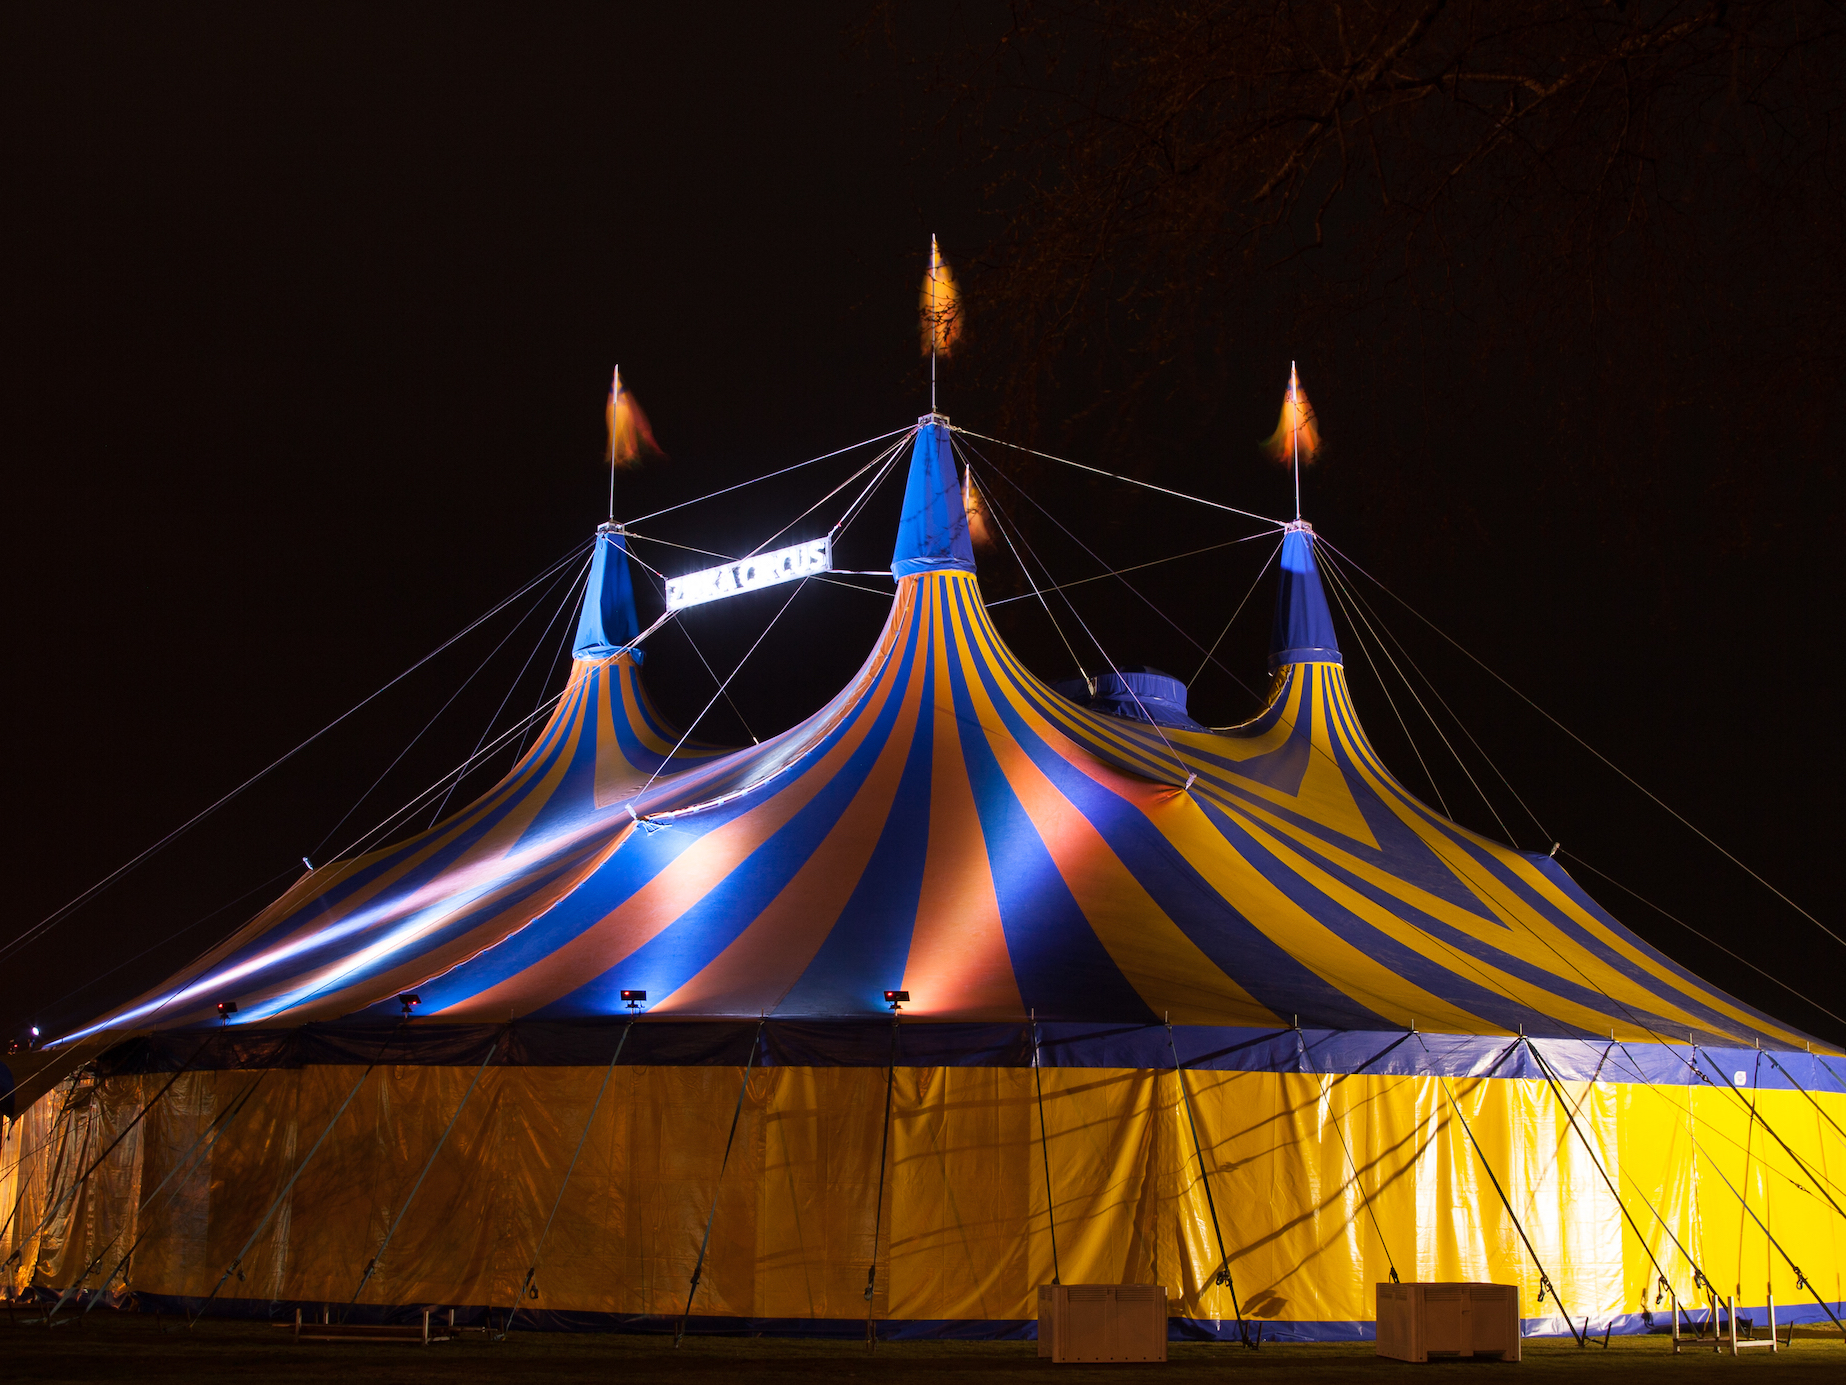 "Circus Tent, Taupo" Photo by russellstreet CC BY SA 2.0